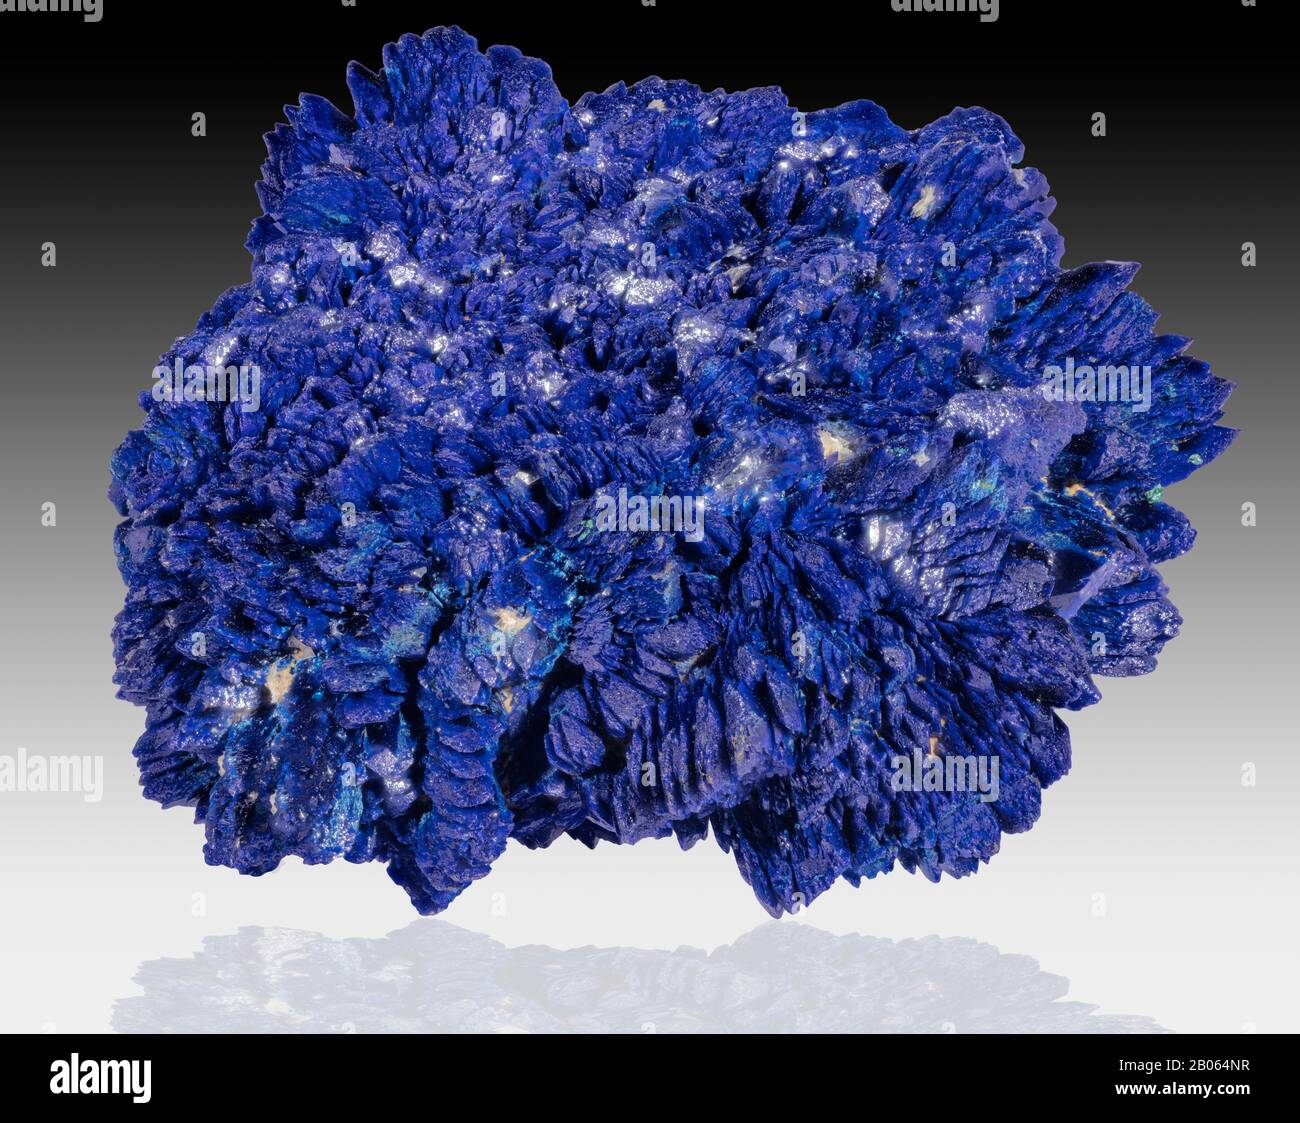 Azurite is a soft stone, named for its deep “azure blue” color. It is a copper carbonate mineral found in the upper oxidized portions of copper ore fo Stock Photo